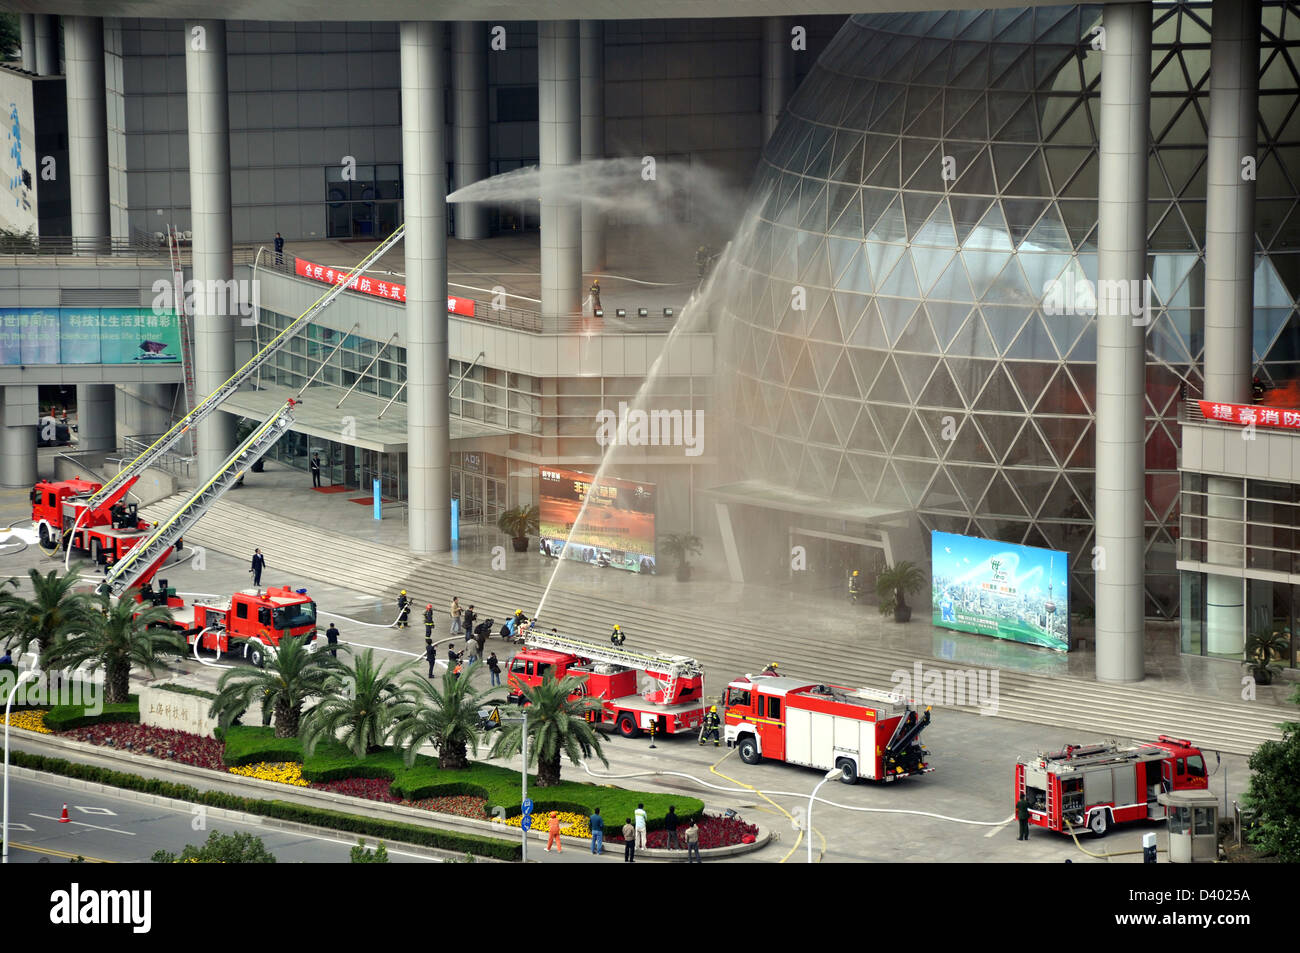 Chinese fire department at the Shanghai Sciences and technology museum - Shanghai, china Stock Photo